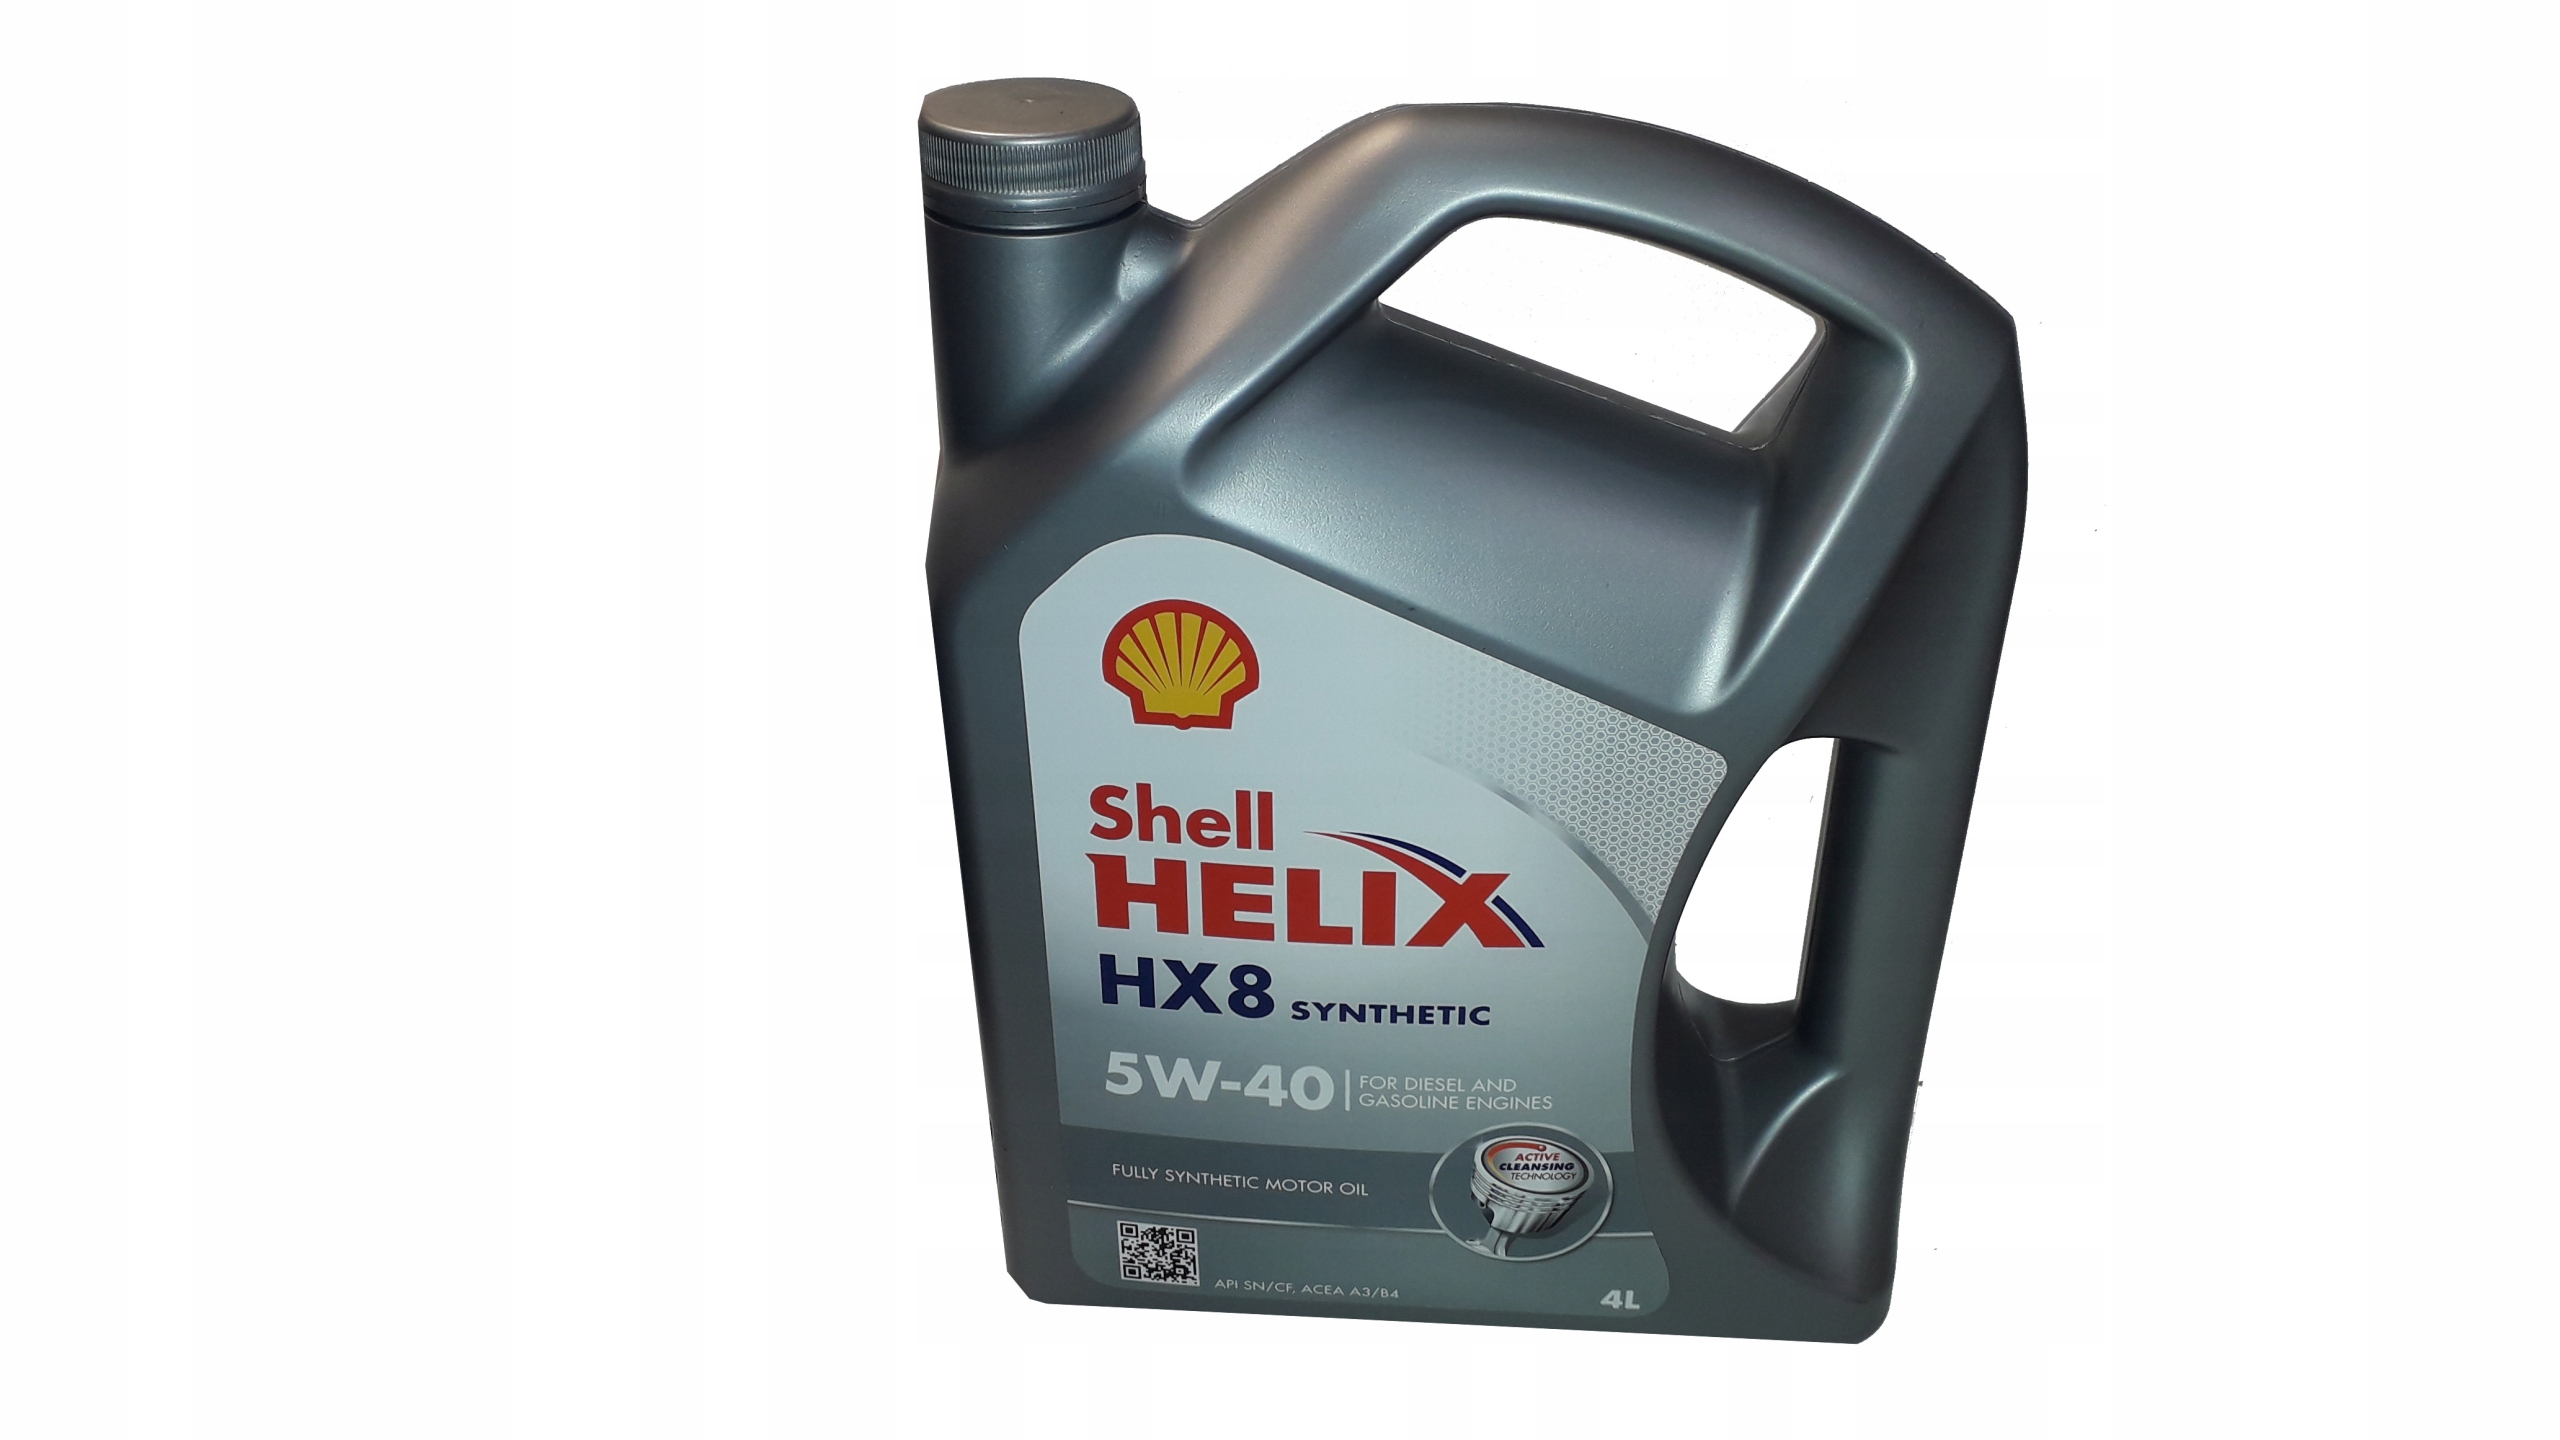 Shell Helix hx8 Synthetic 5w-40. Shell Helix Ultra ect c3 5w-30 4 л. Shell Helix Ultra 5x30 4l. Shell Helix Ultra professional ect c3 5w-30. Масло av